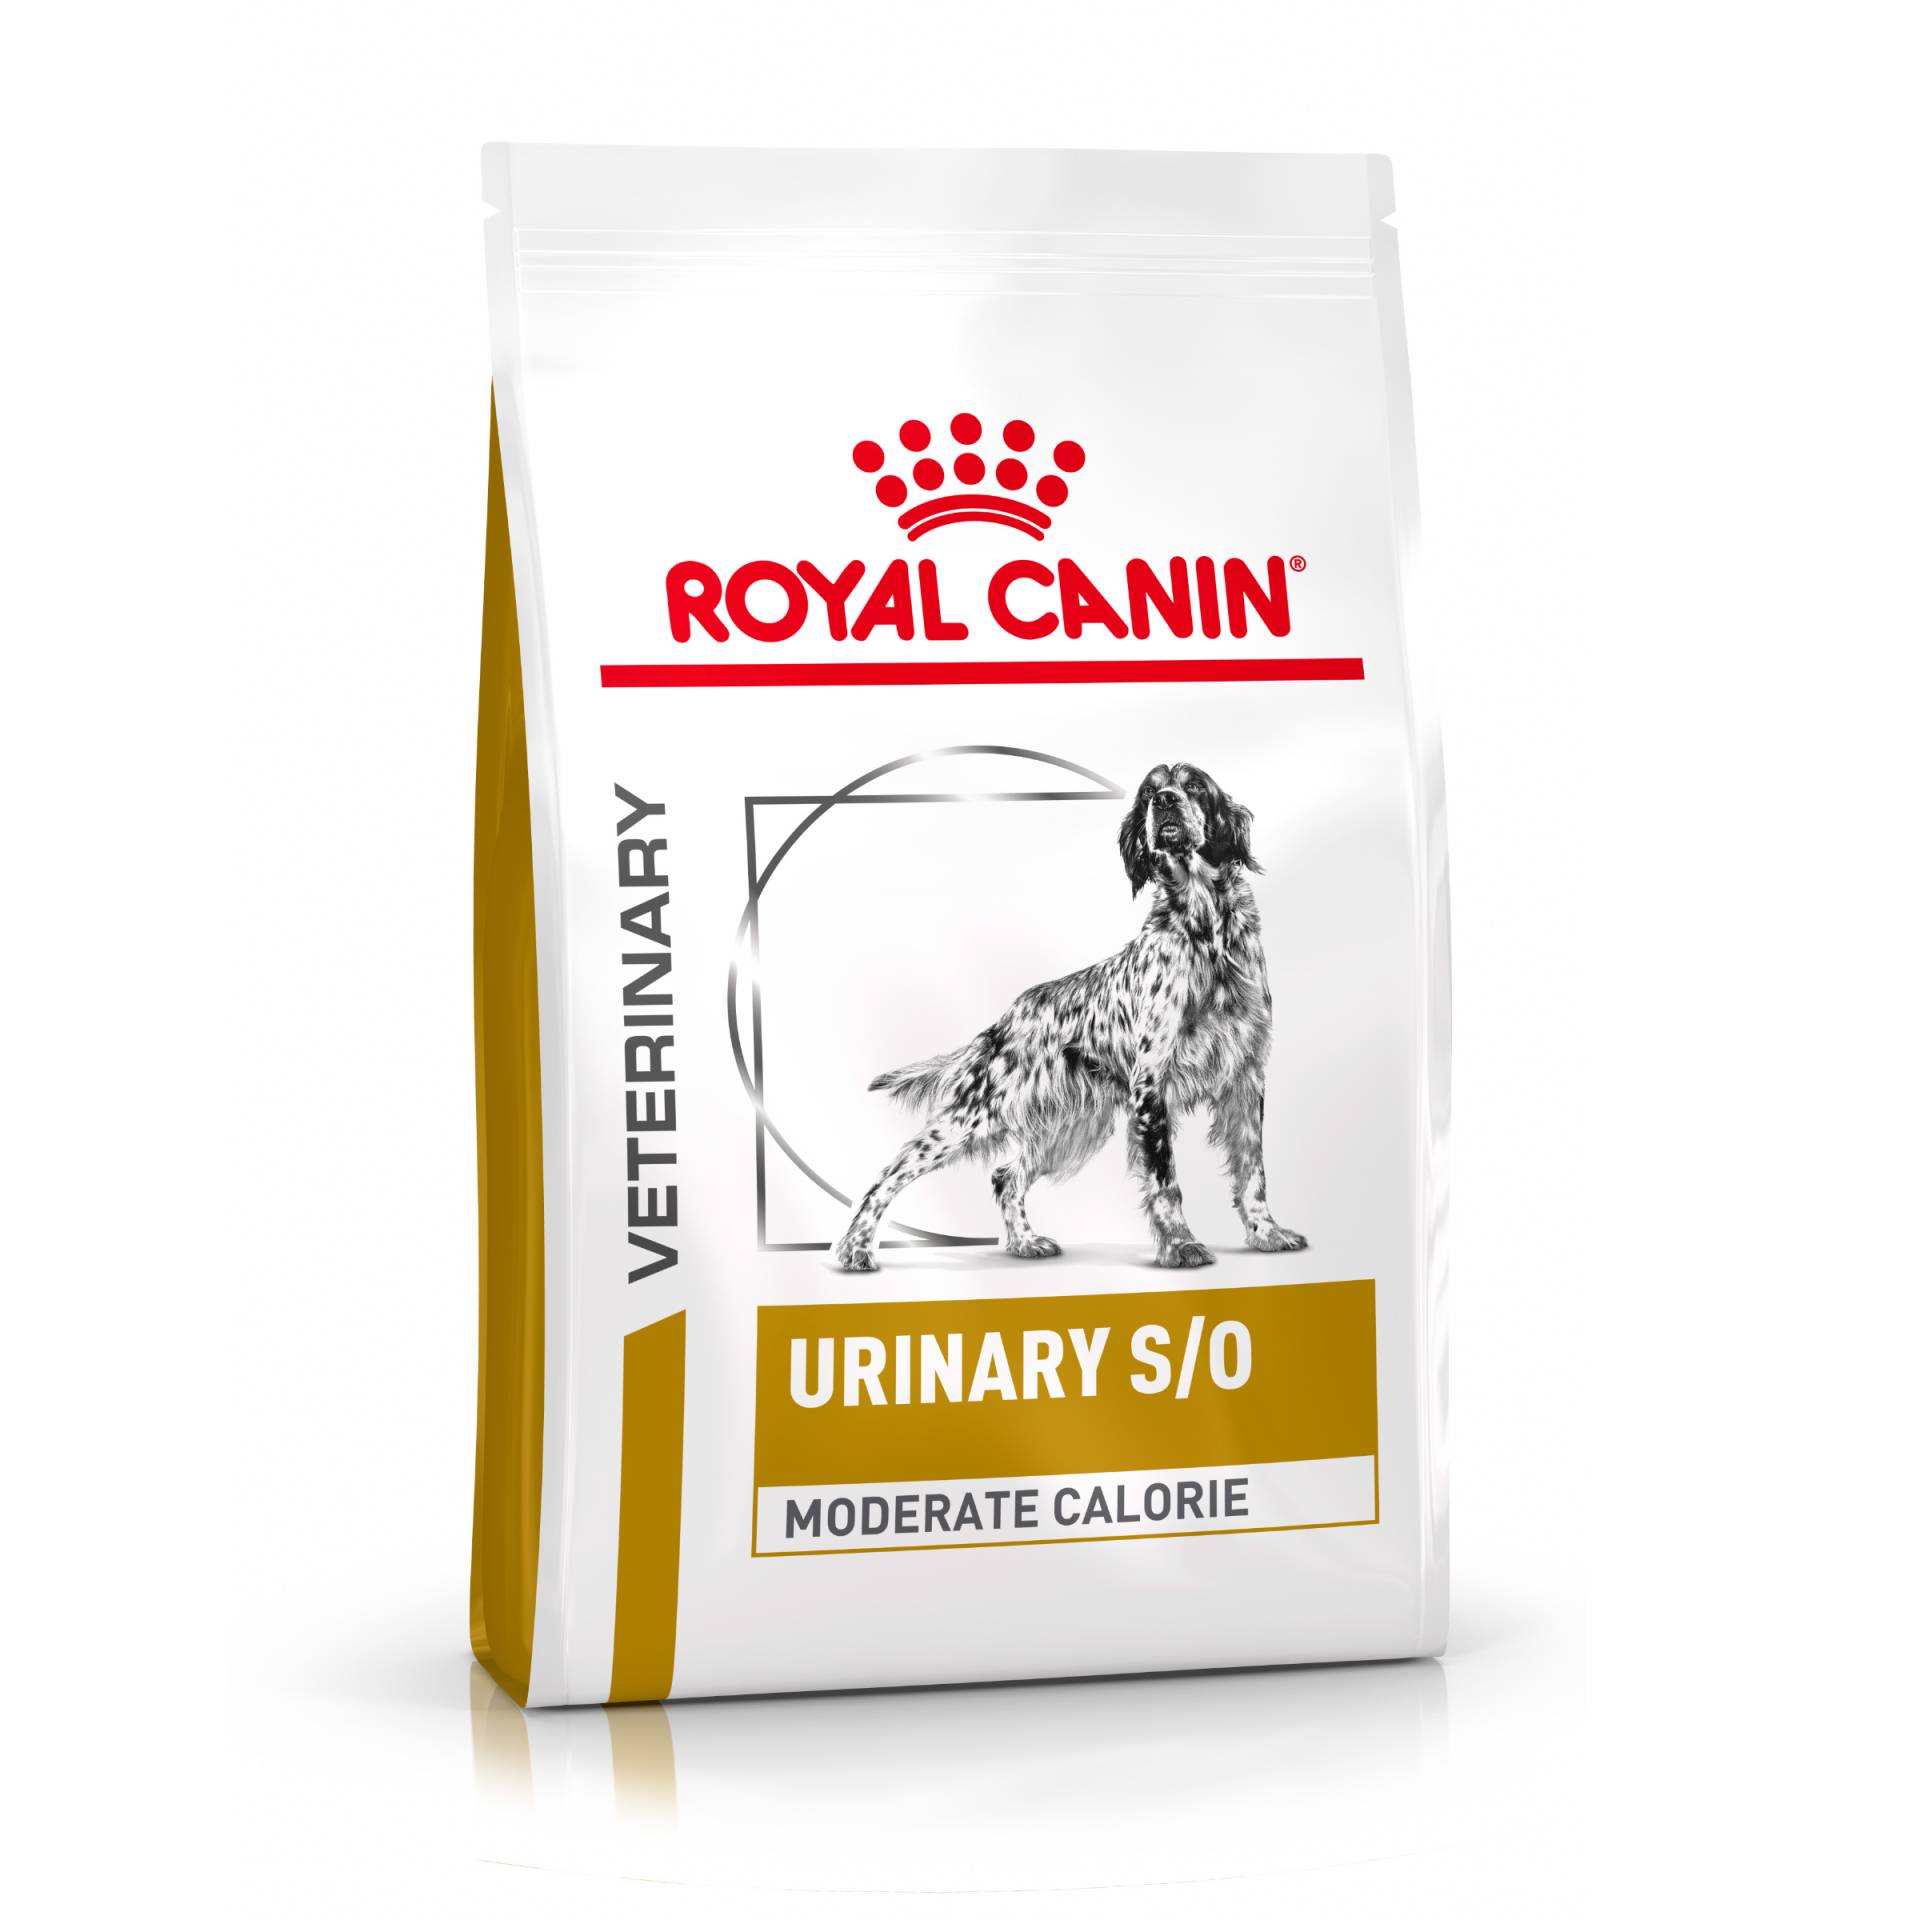 Royal Canin Veterinary Canine Urinary S/O Moderate Calorie - 6,5 kg von Royal Canin Veterinary Diet